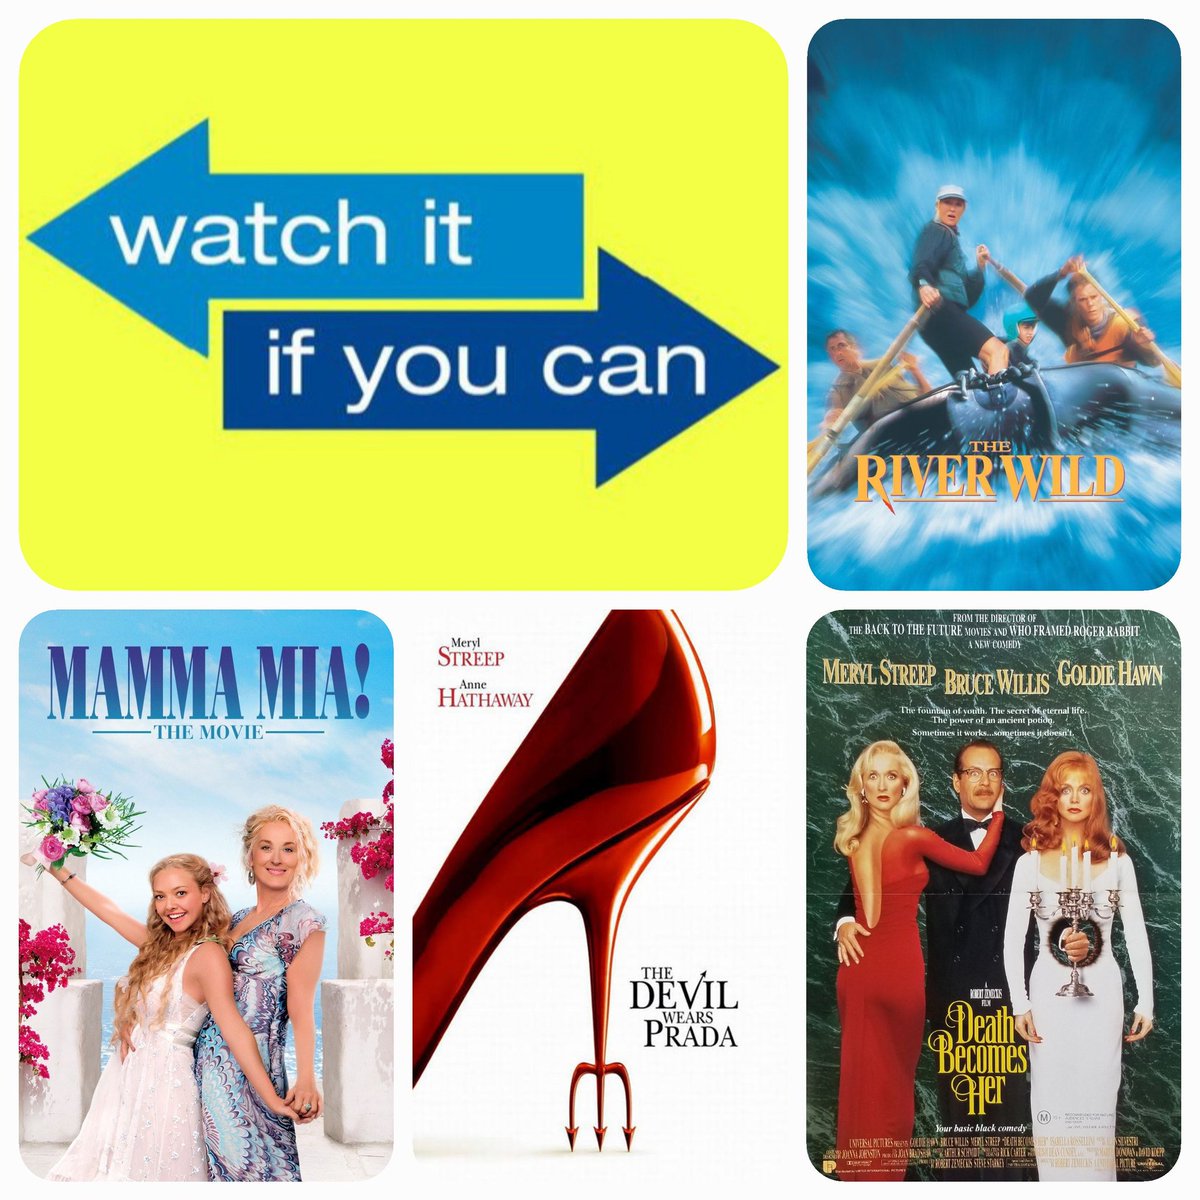 Some of our favourite movies featuring Meryl Streep.

Any you haven't seen? Then maybe...
just maybe #watchitifyoucan